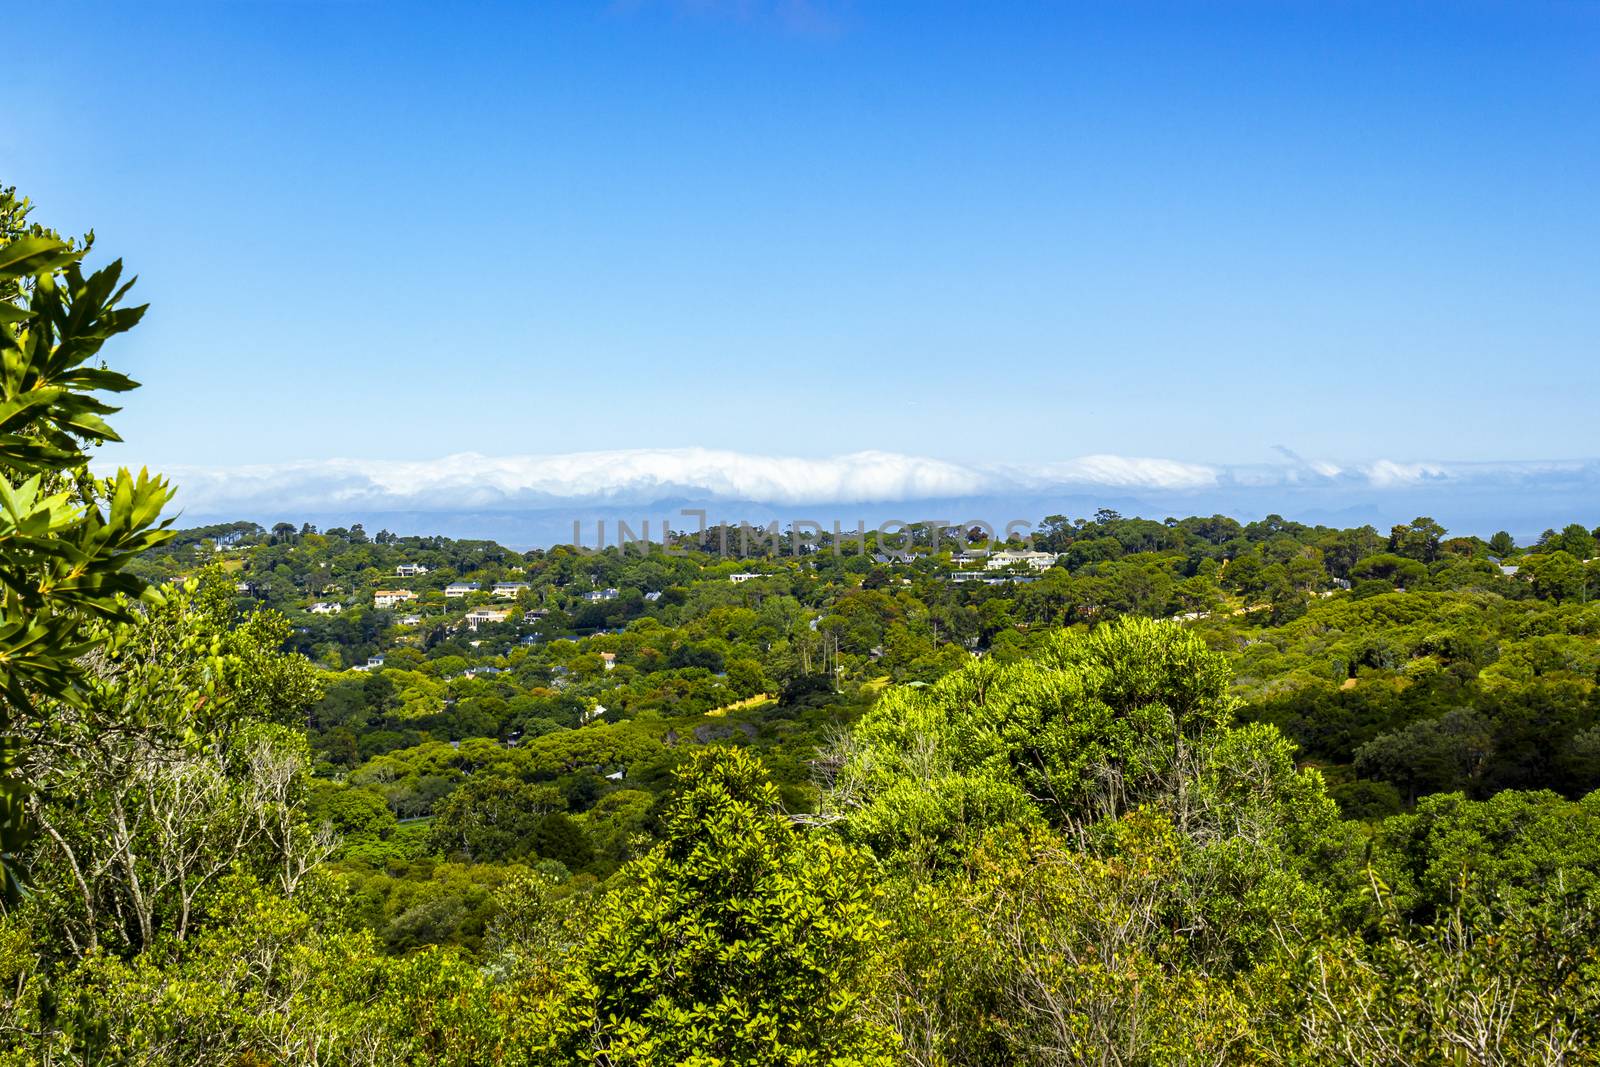 Panoramic view of Cape Town and nature in Kirstenbosch National Botanical Garden, South Africa.